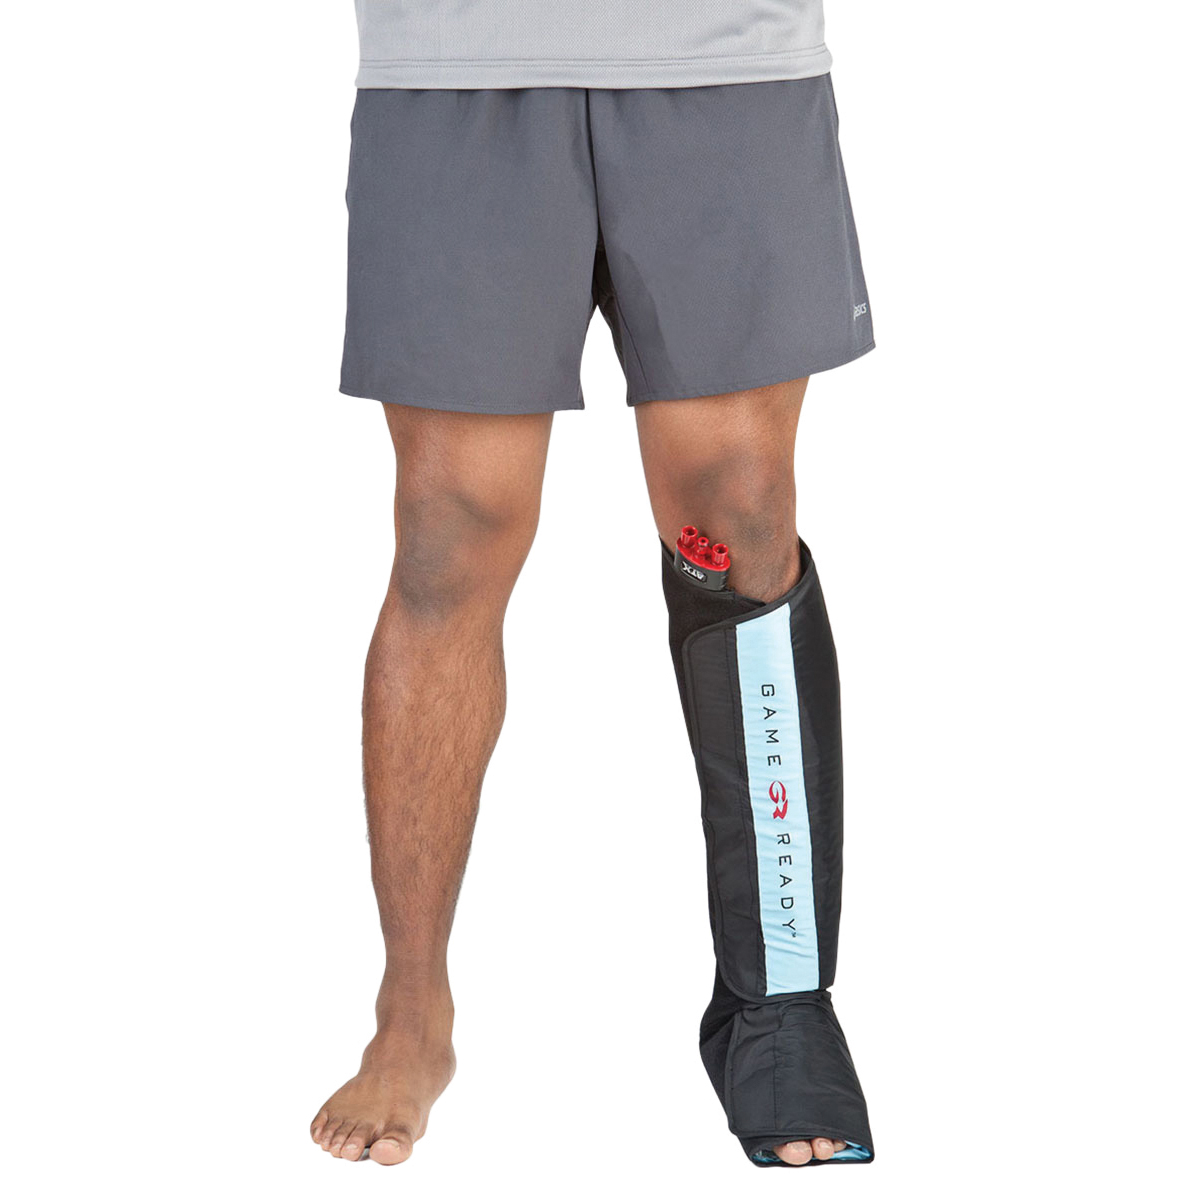 Half Leg Boot Wrap* with ATX, Large - 3009466 - Game Ready - 13-2513 -  Compression Therapy - 3B Scientific